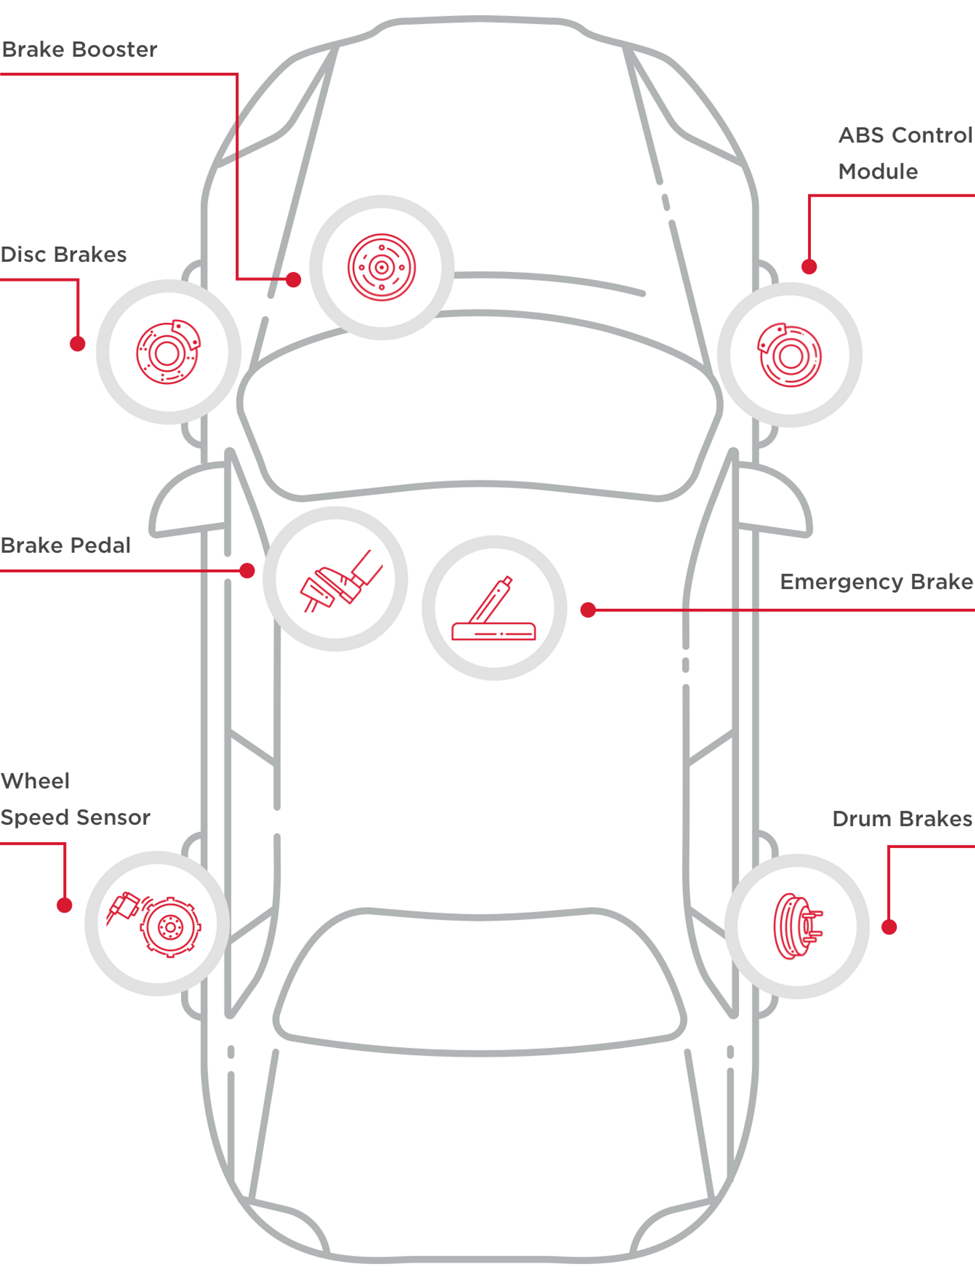 Illustration of a vehicle with arrows pointing to specific brake-related areas of the braking system. Brake Booster. Disc Brakes. Brake Pedal. Wheel Speed Sensor. ABS Control Module. Emergency Brake. Drum Brakes.